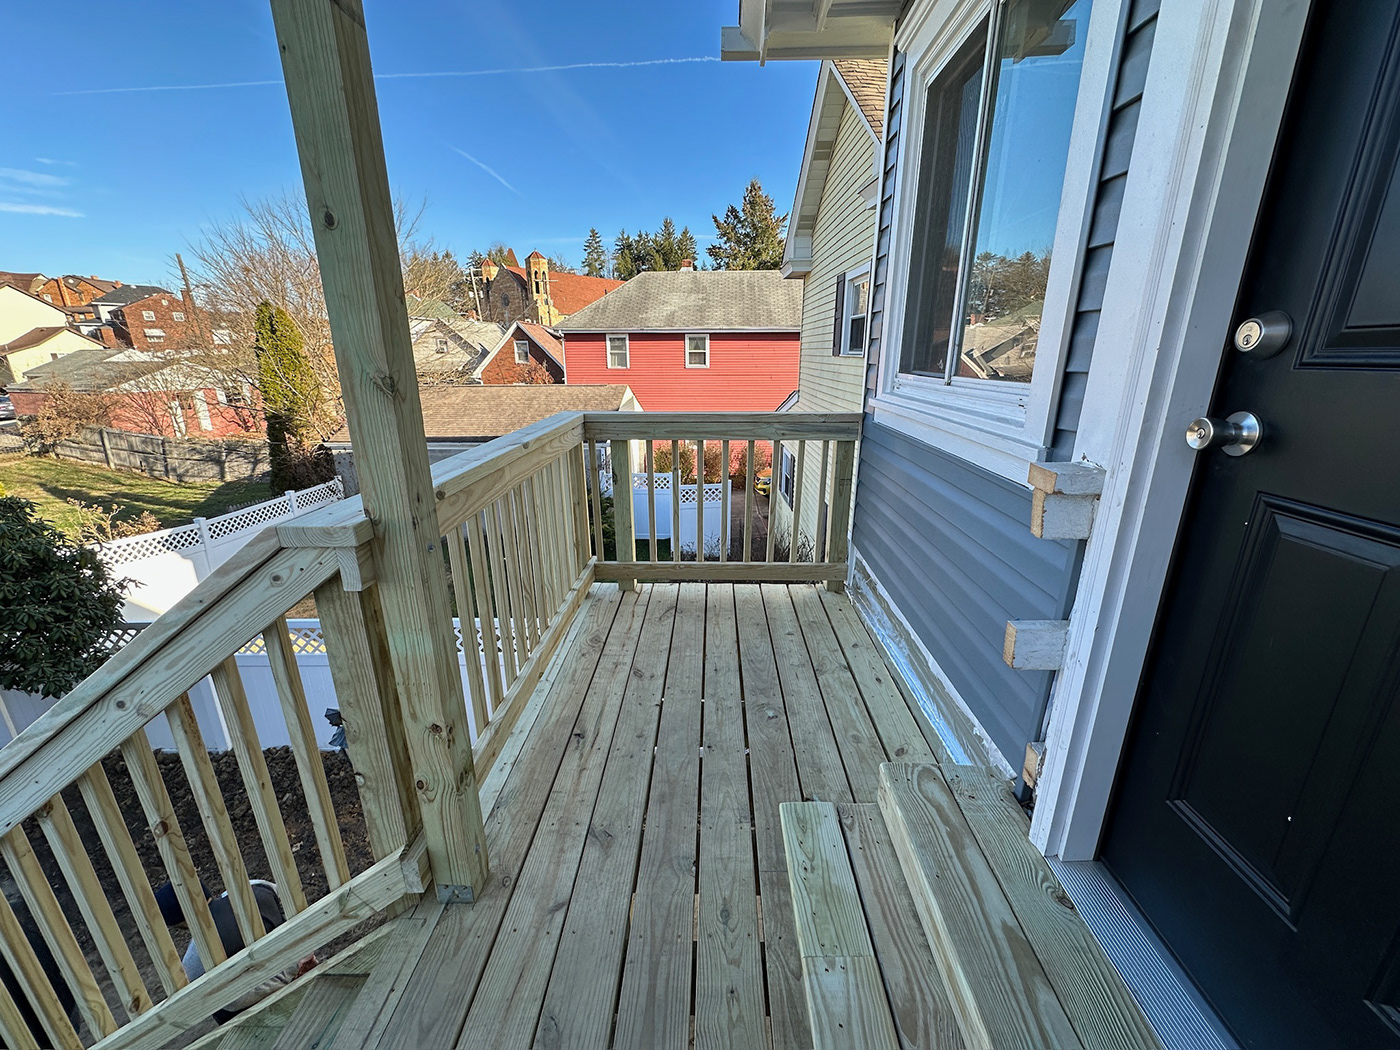 inspection passed permit application pittsburgh decking pittsburgh remodeling wooden deck